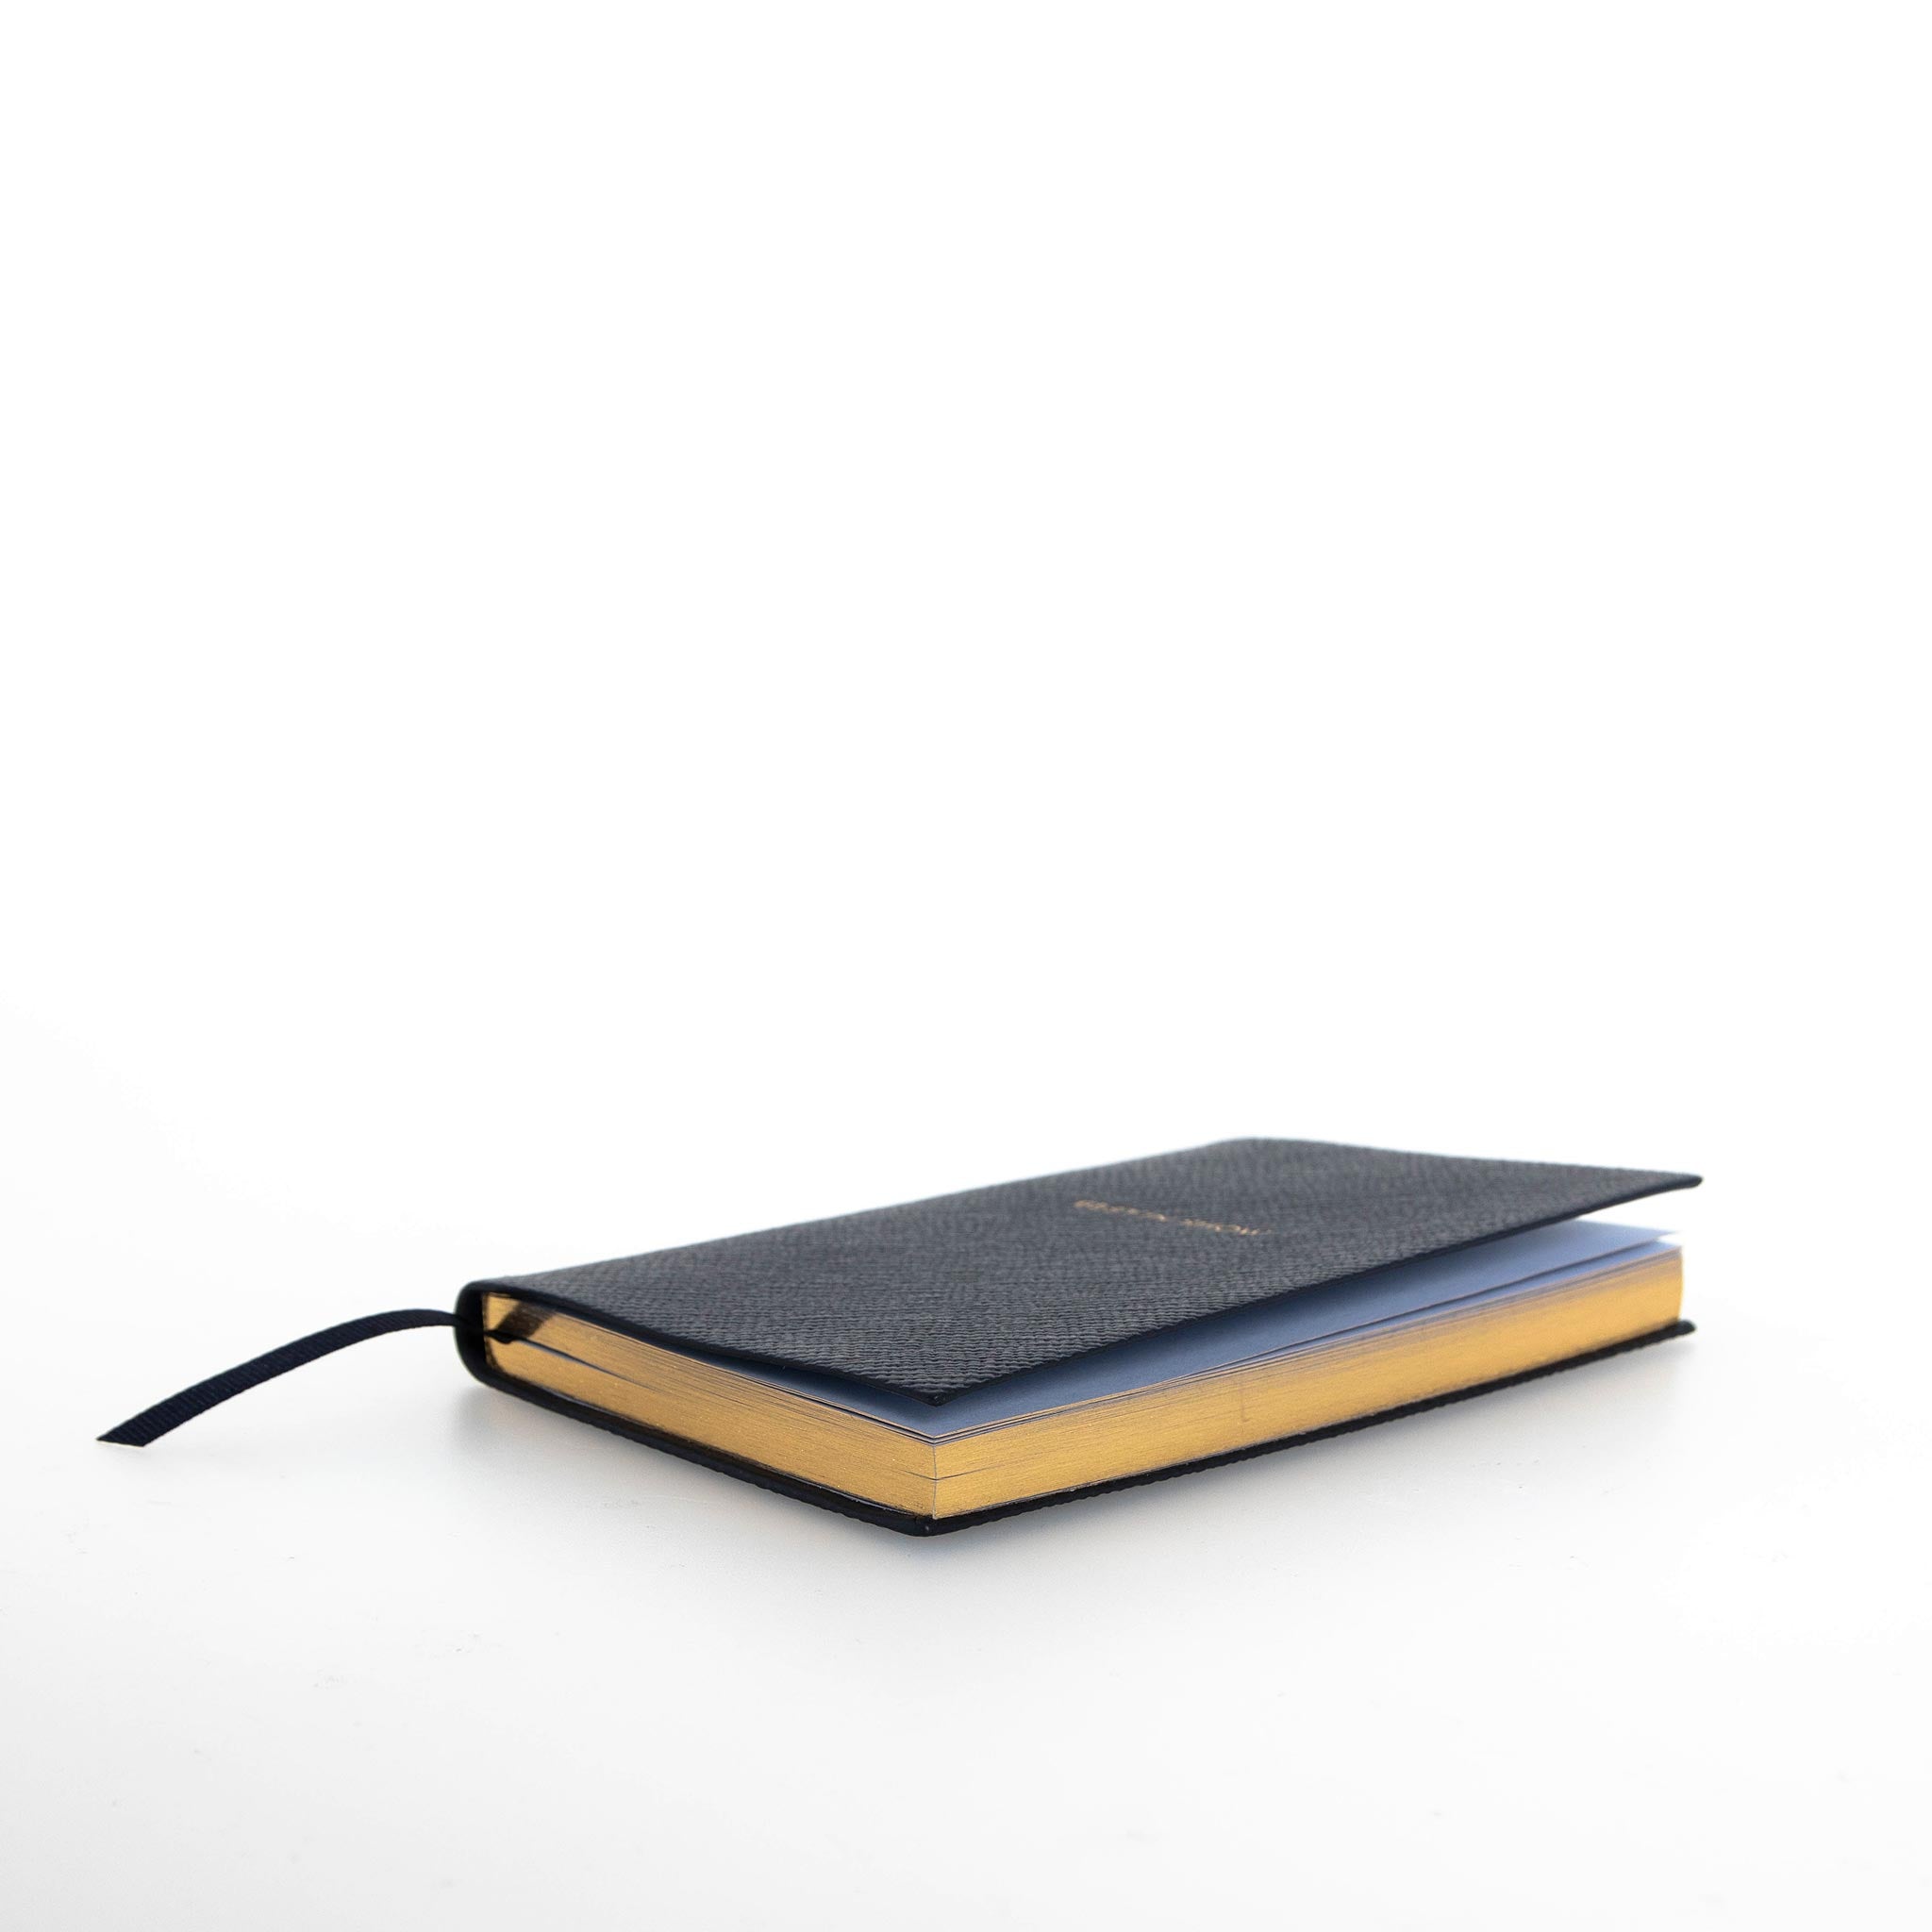 SMYTHSON - PANAMA NOTEBOOK - BEST IN SHOW - 1203277